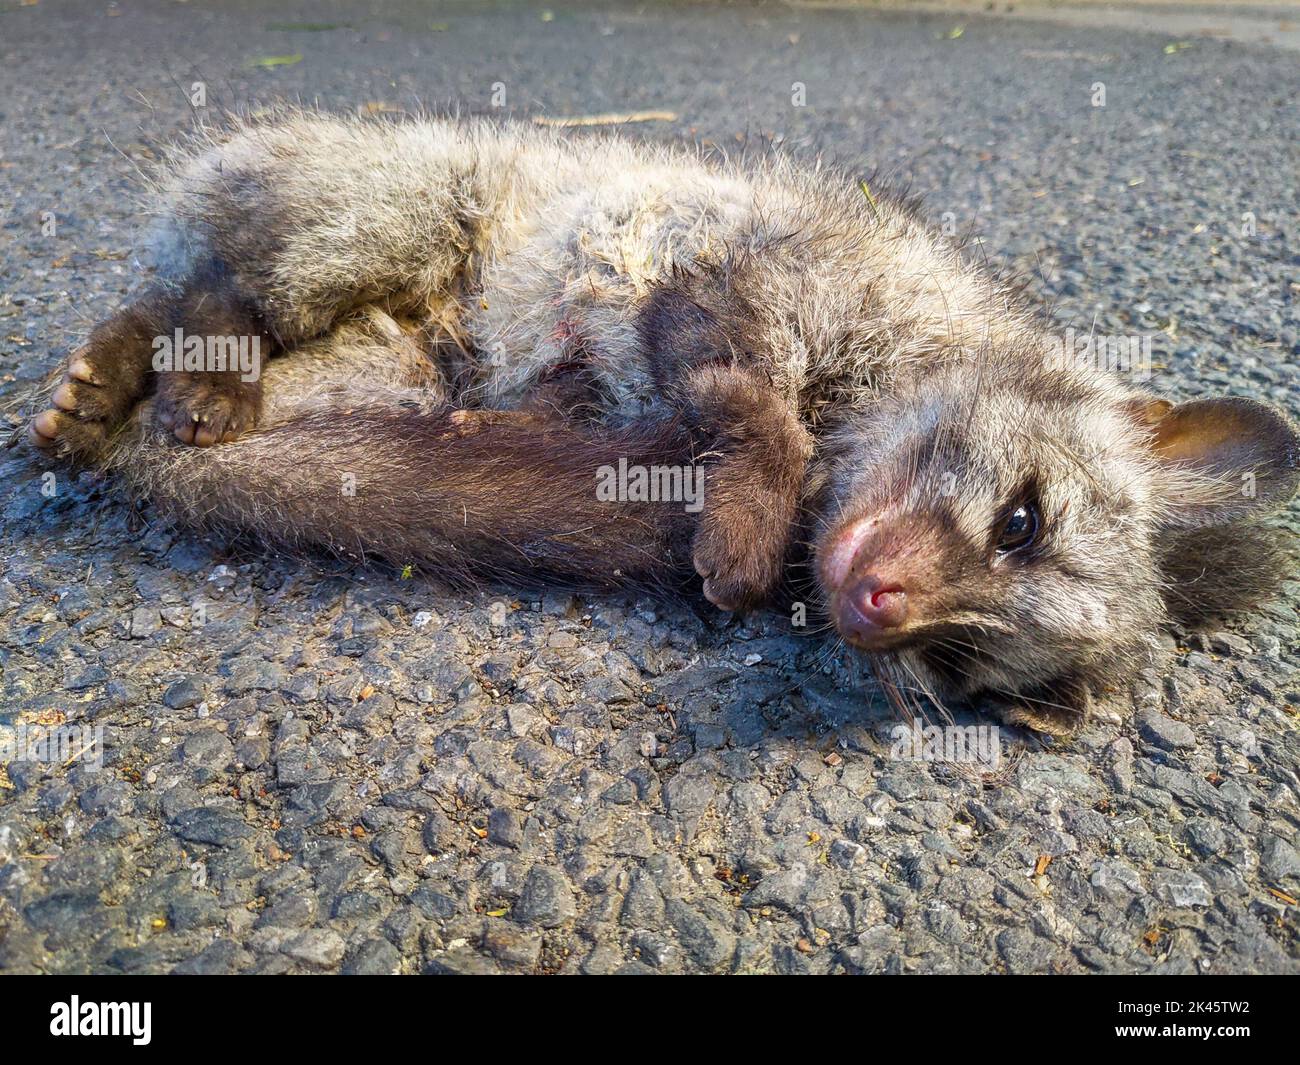 A gray fox pup laying dead after it met with an accident while crossing the road in the middle of a National Park . Uttarakhand India Stock Photo